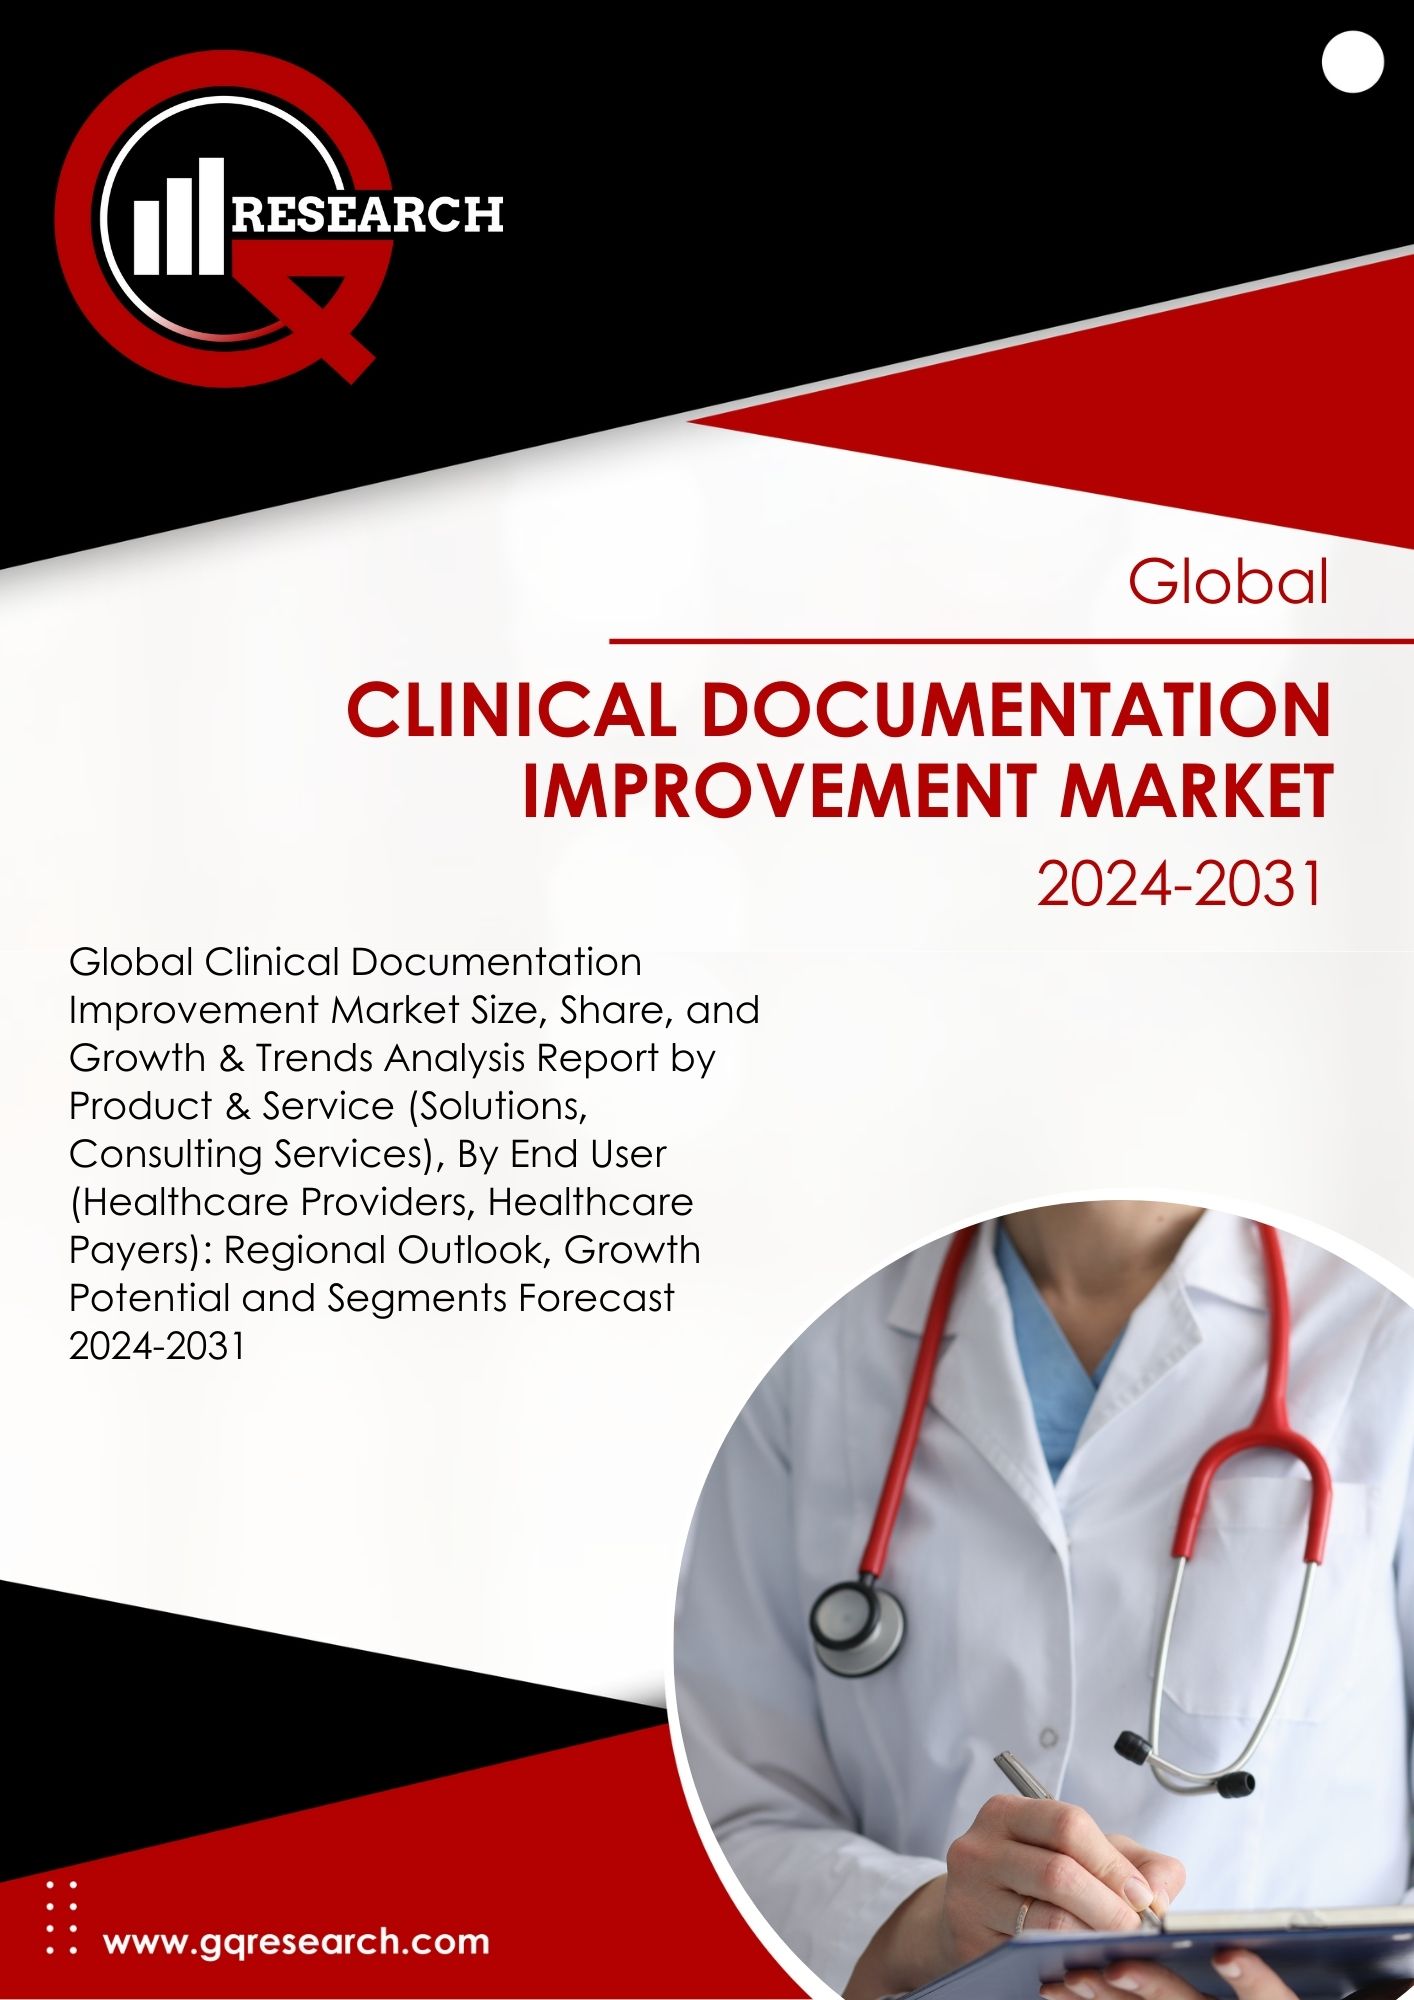 Clinical Documentation Improvement Market Size, Share, Growth and Forecast to 2031 | GQ Research